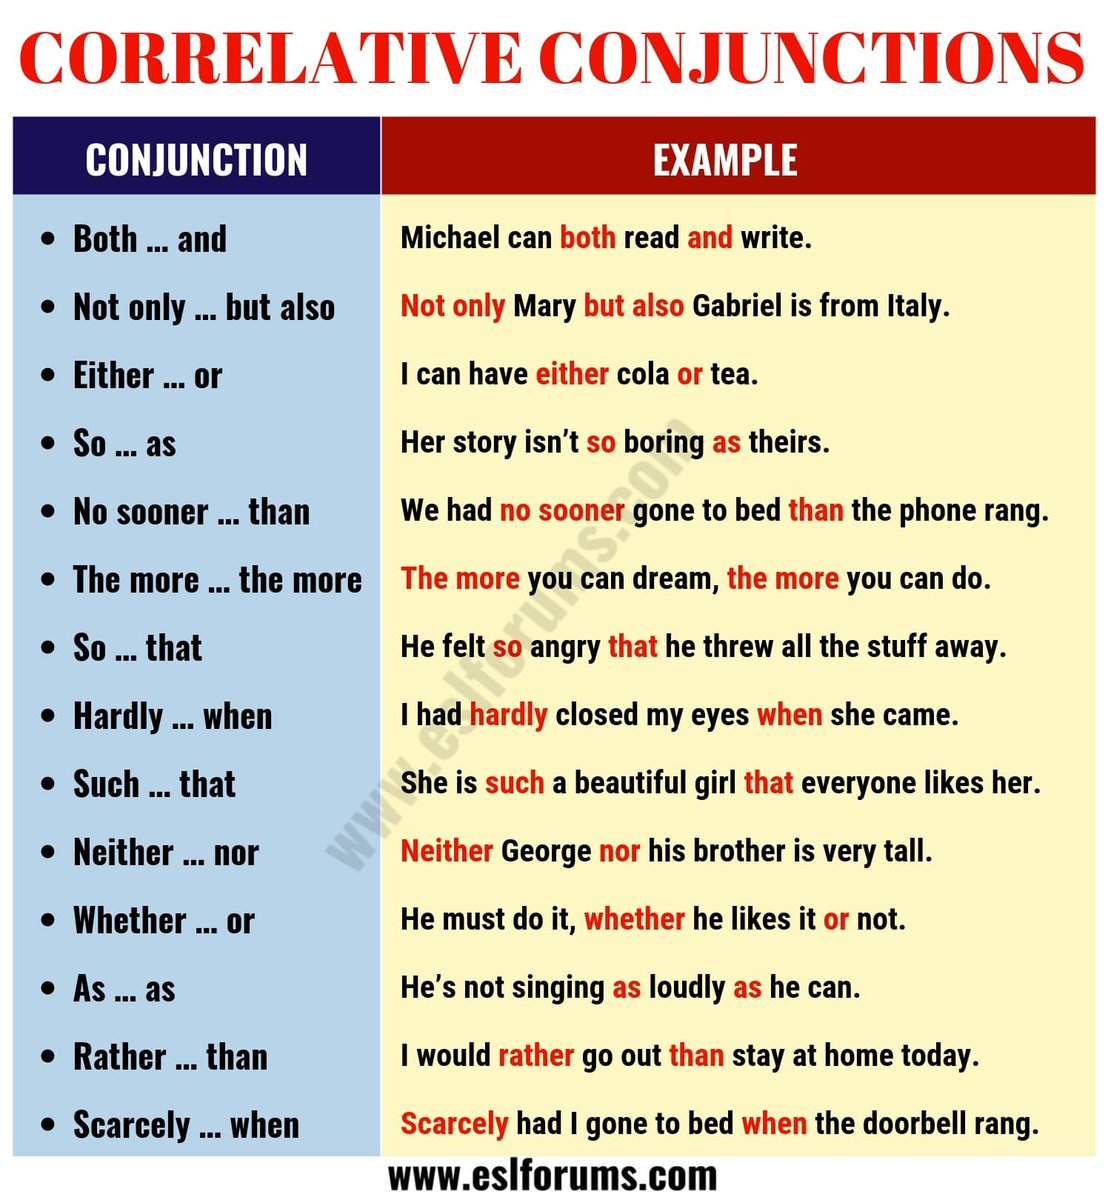 clauses-and-conjunctions-aep22